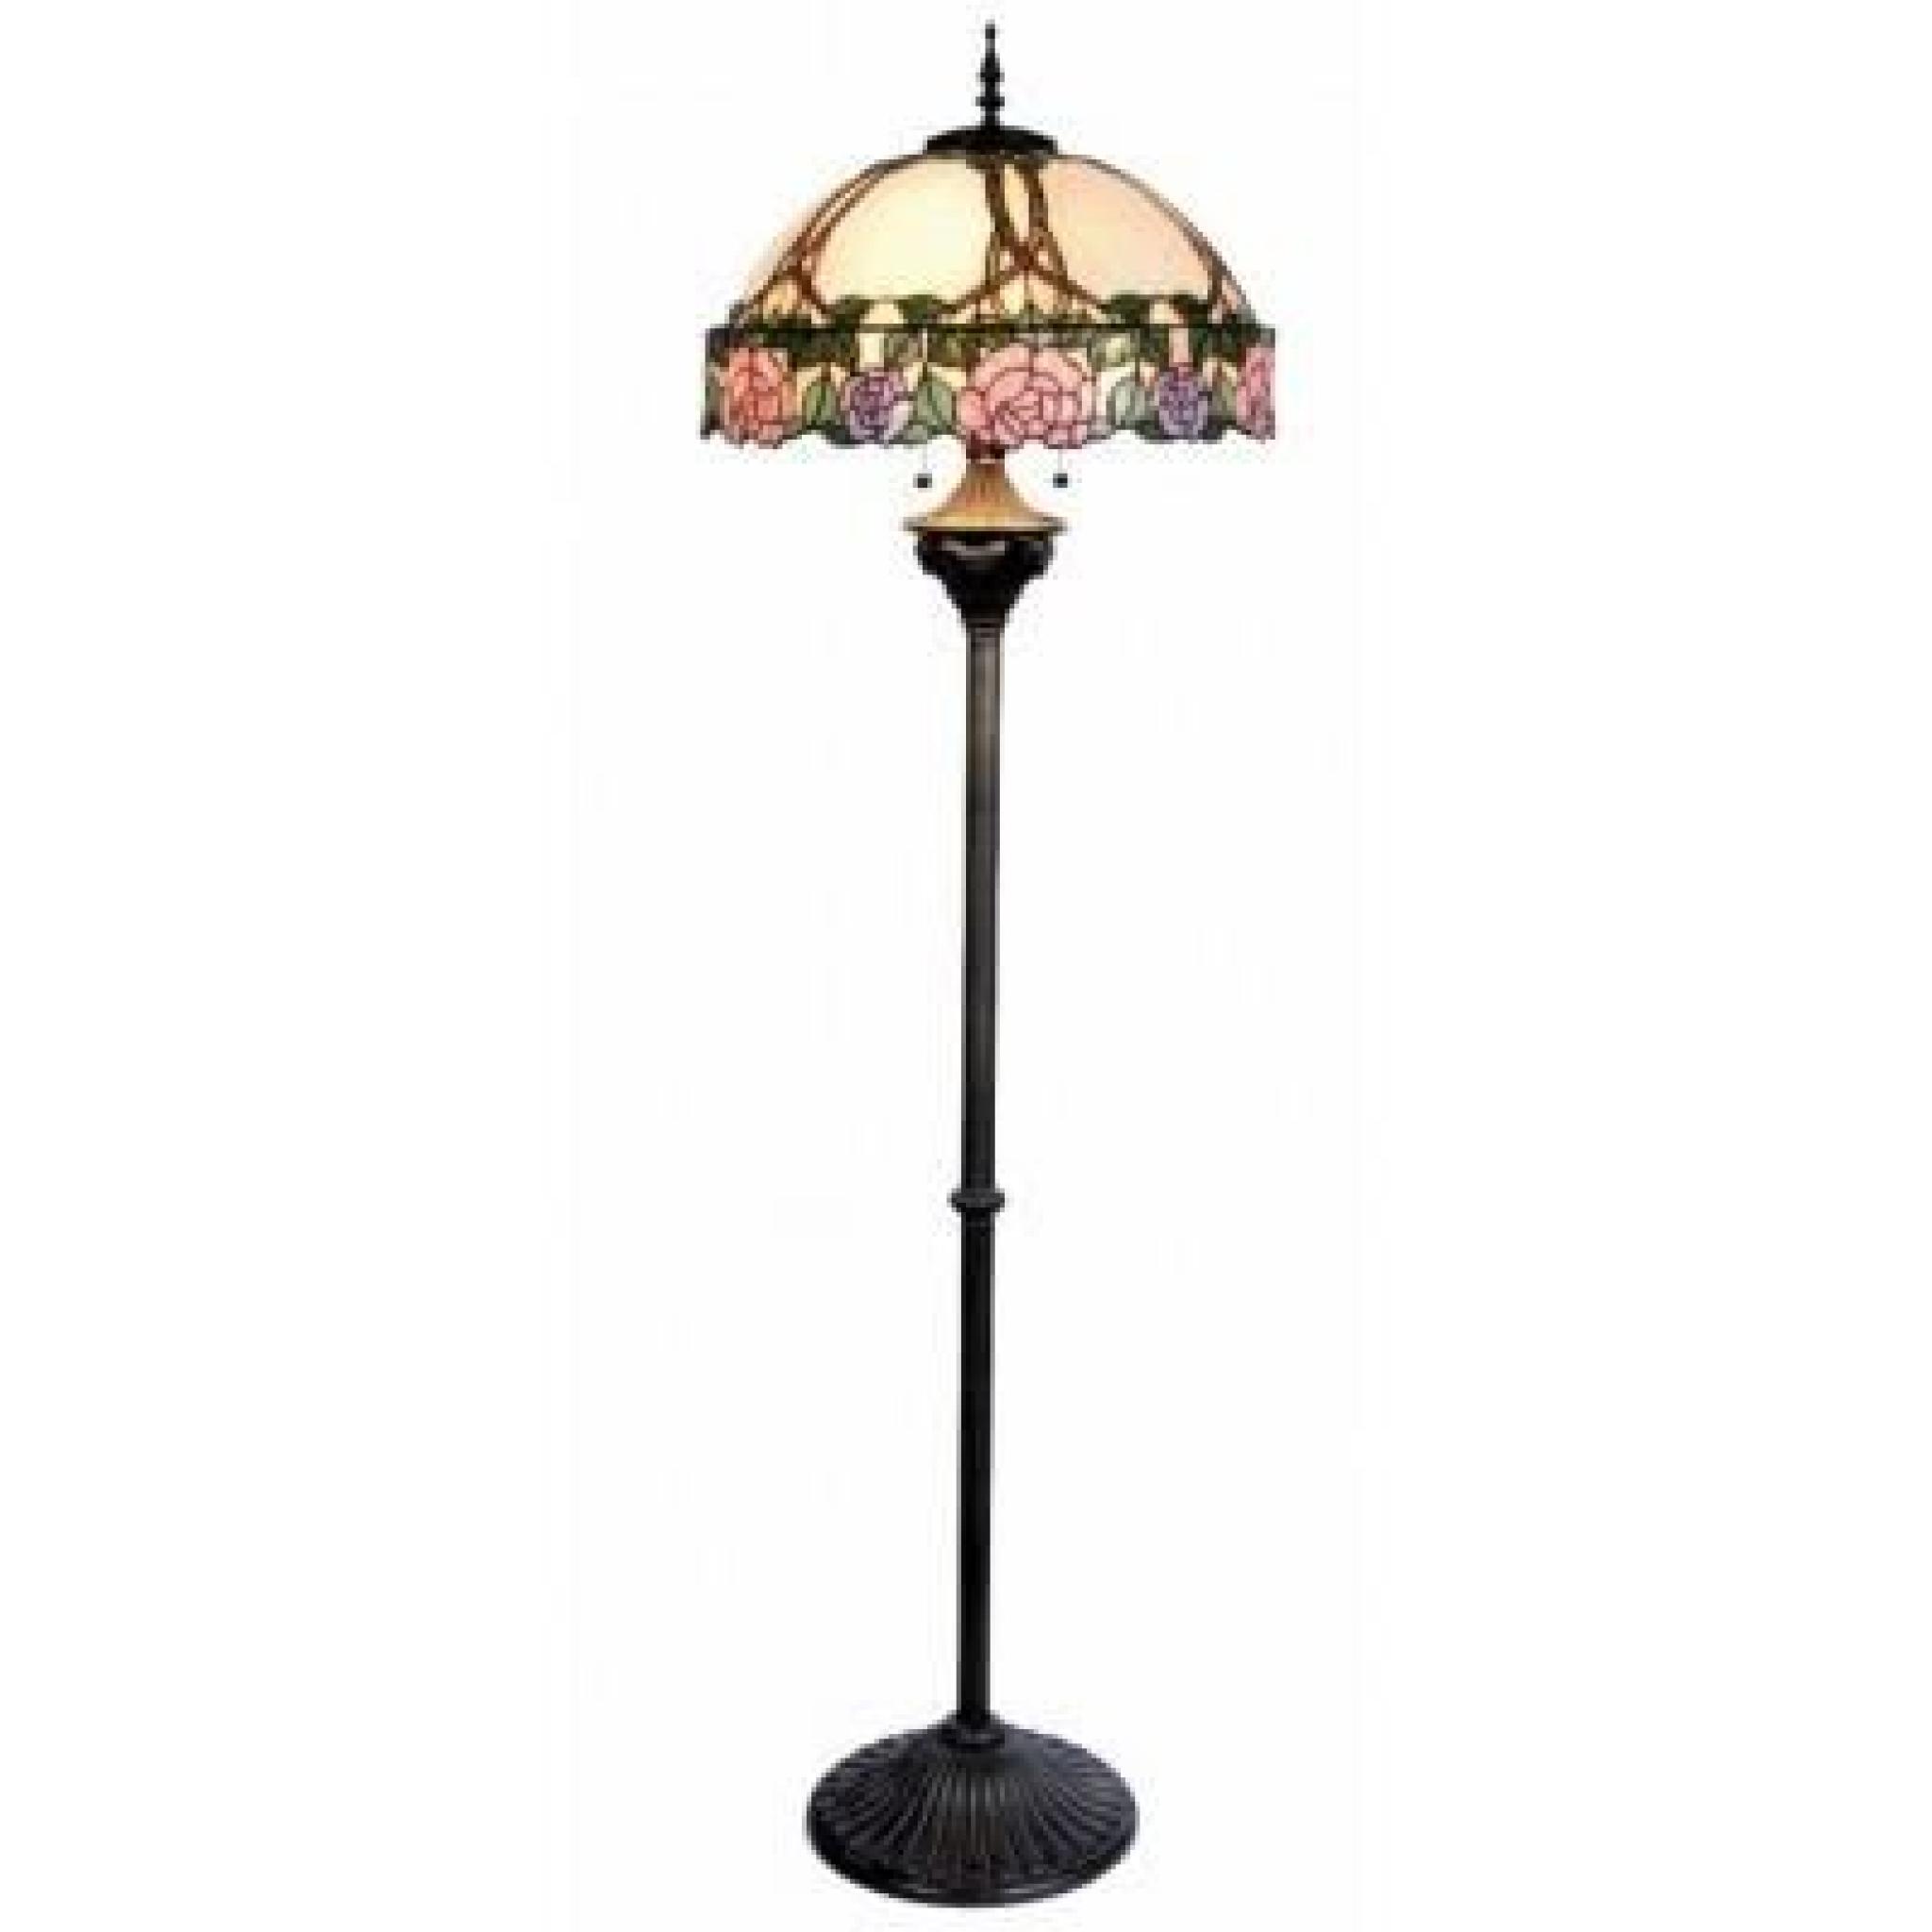 lampadaire style Tiffany reproduction lampe Tiffany metal et verre